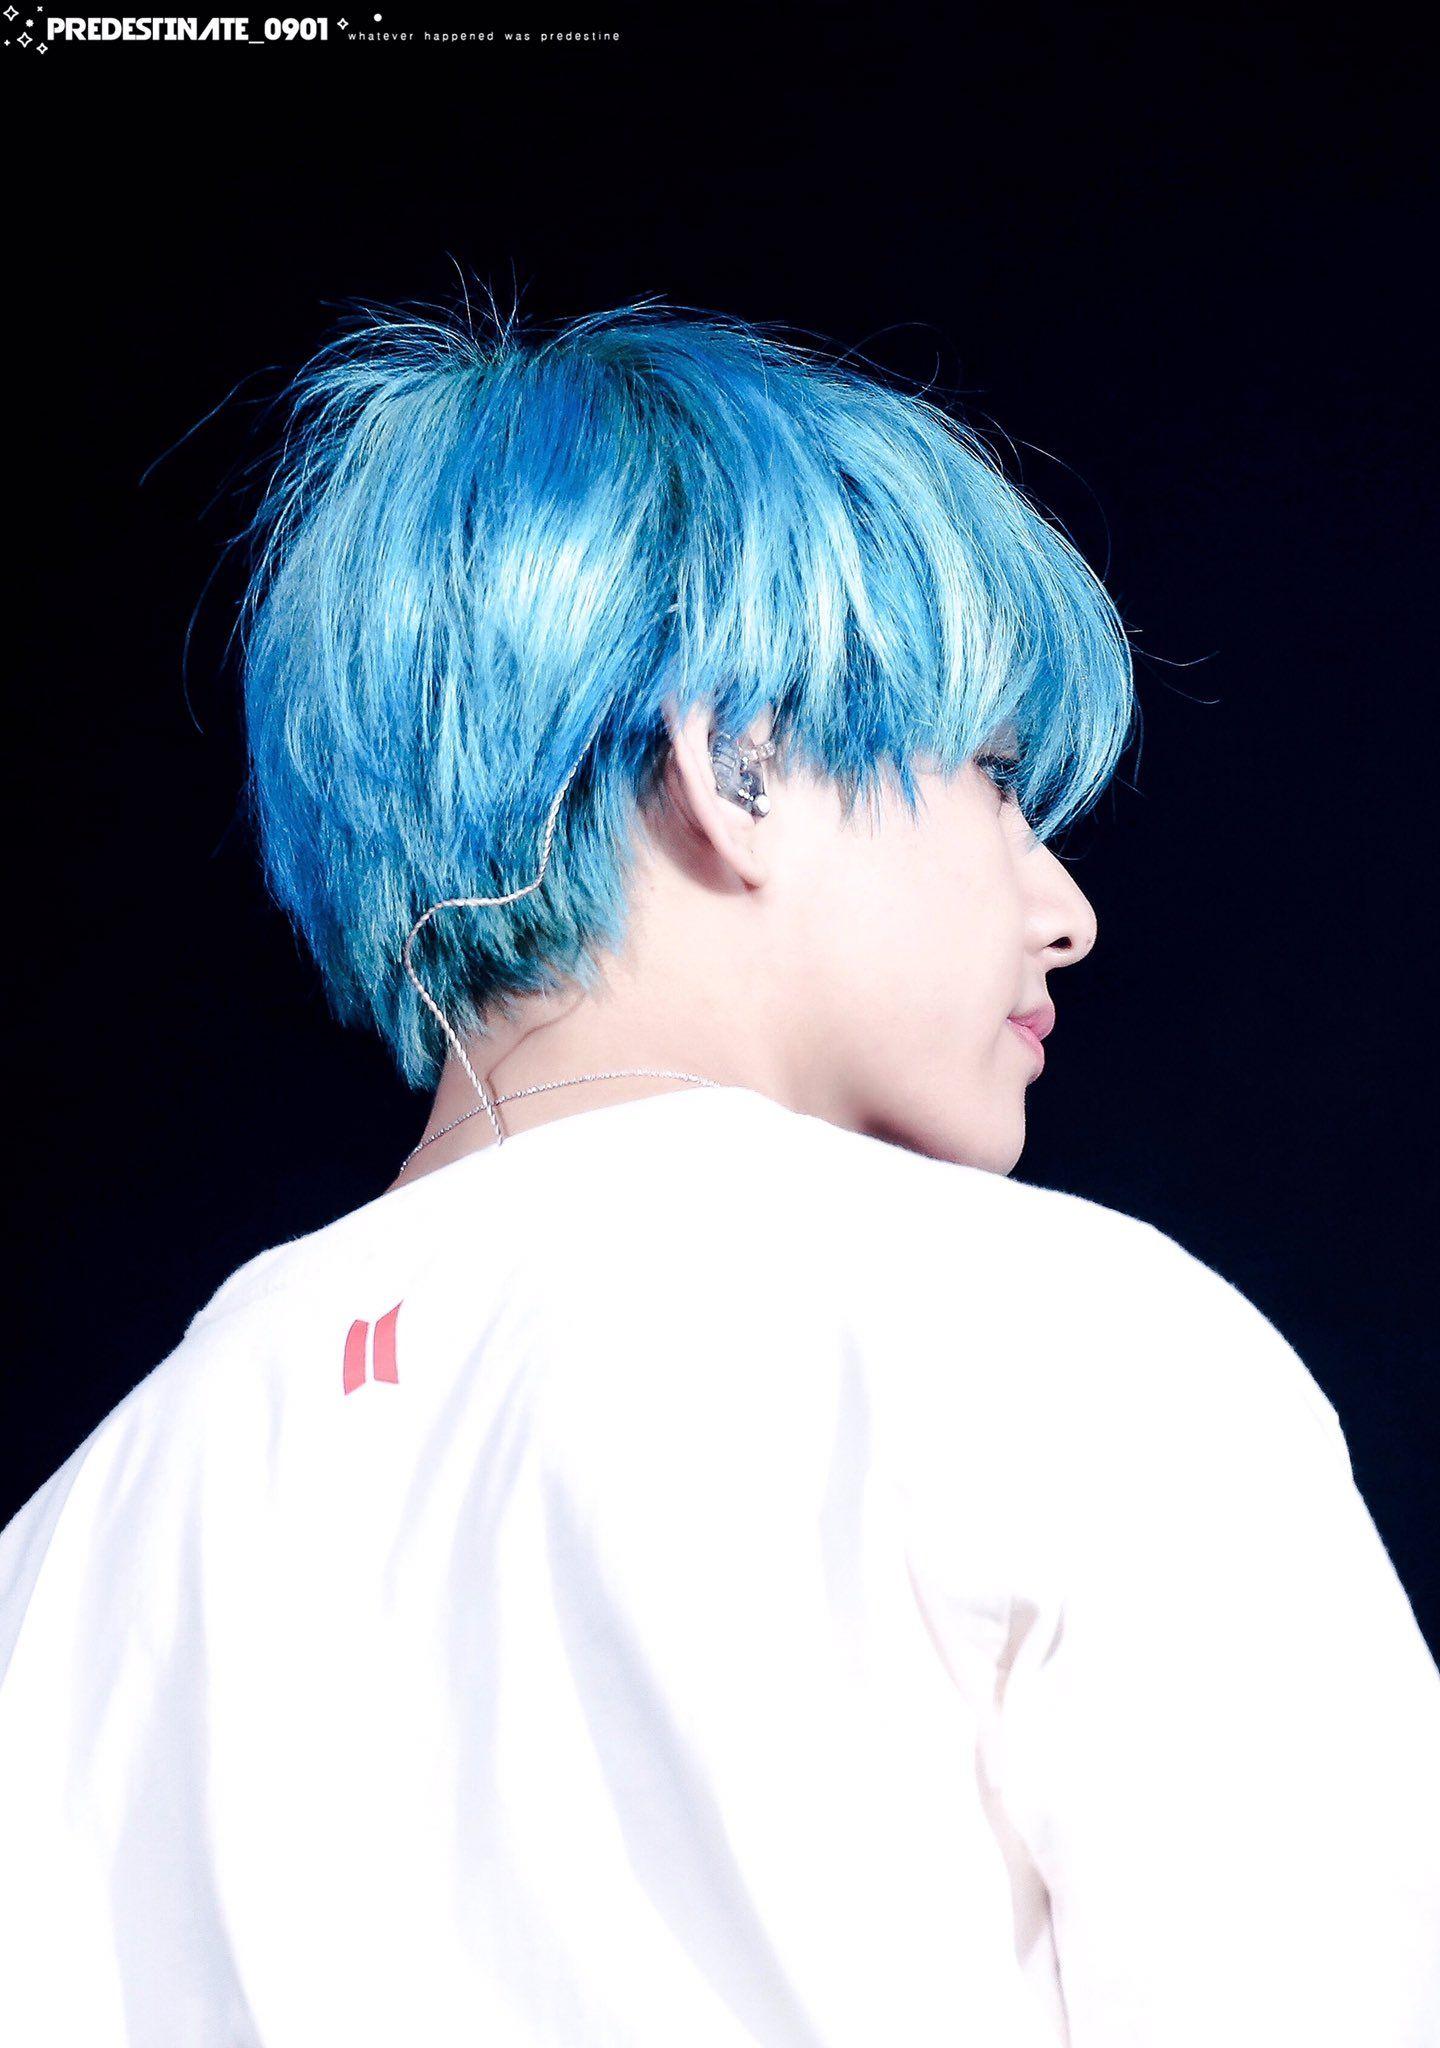 Taehyung Blue Hair Wallpapers - Top Free Taehyung Blue Hair Backgrounds ...